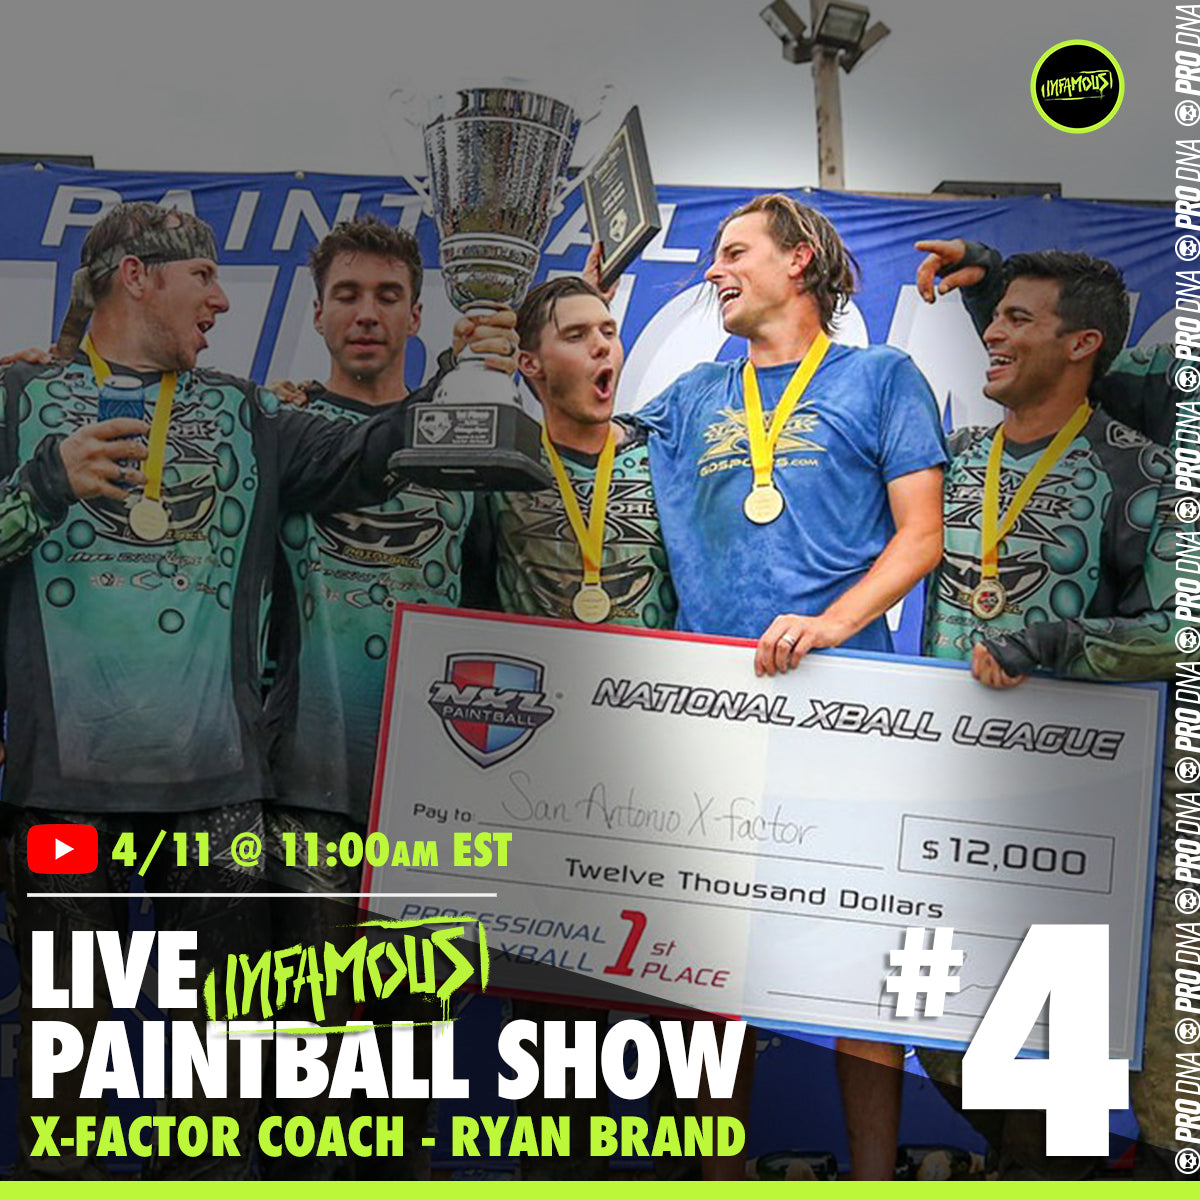 Infamous Live Paintball Show #4 - Ryan Brand